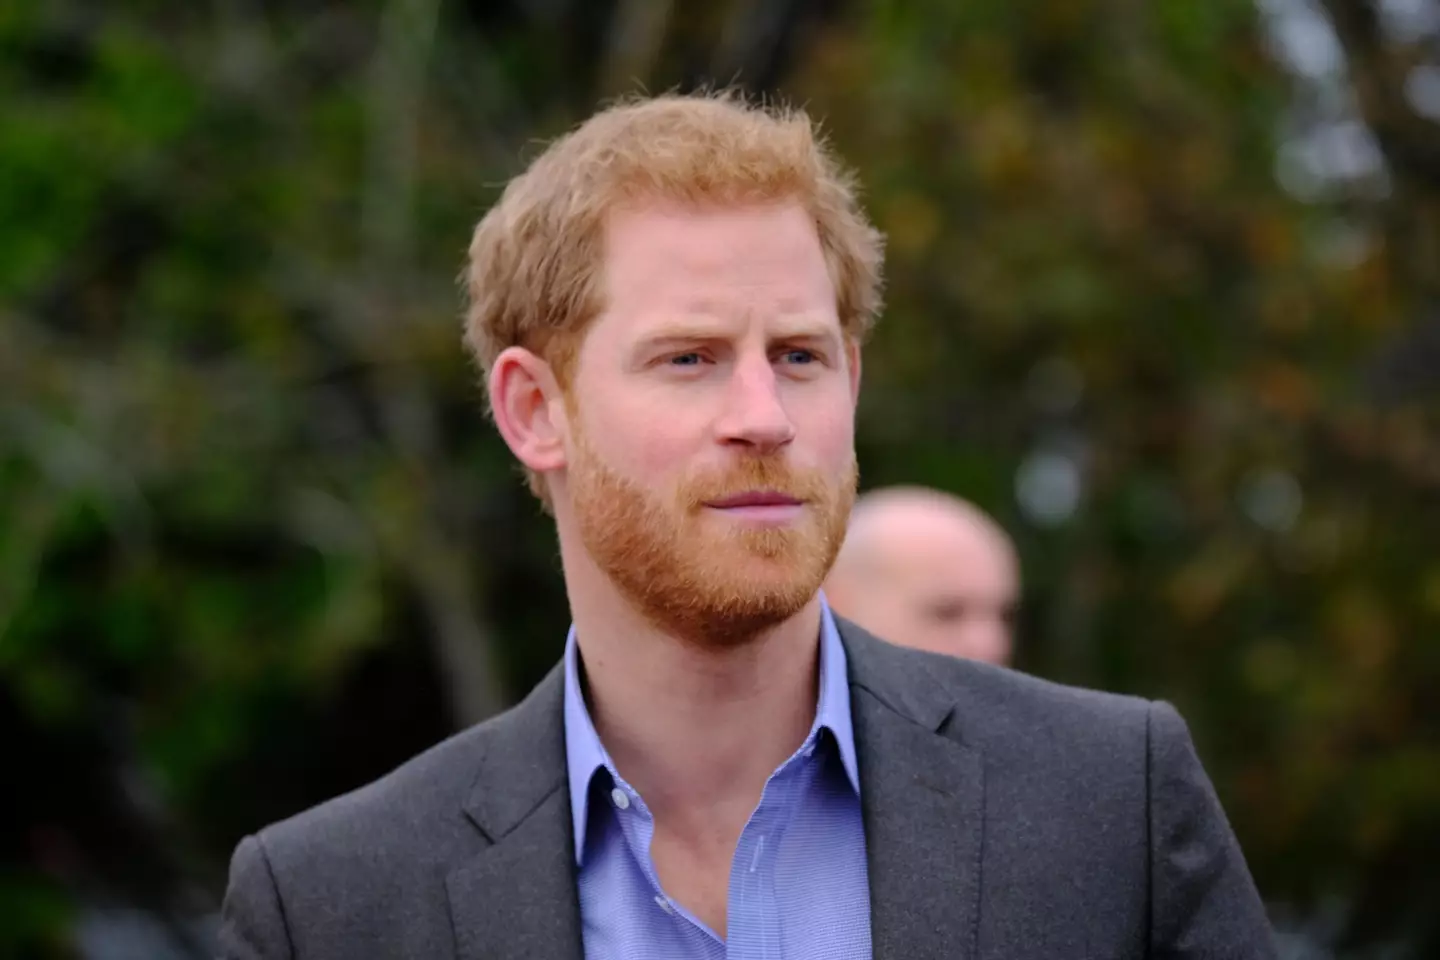 Prince Harry has also spoken about drugs in his new memoir.